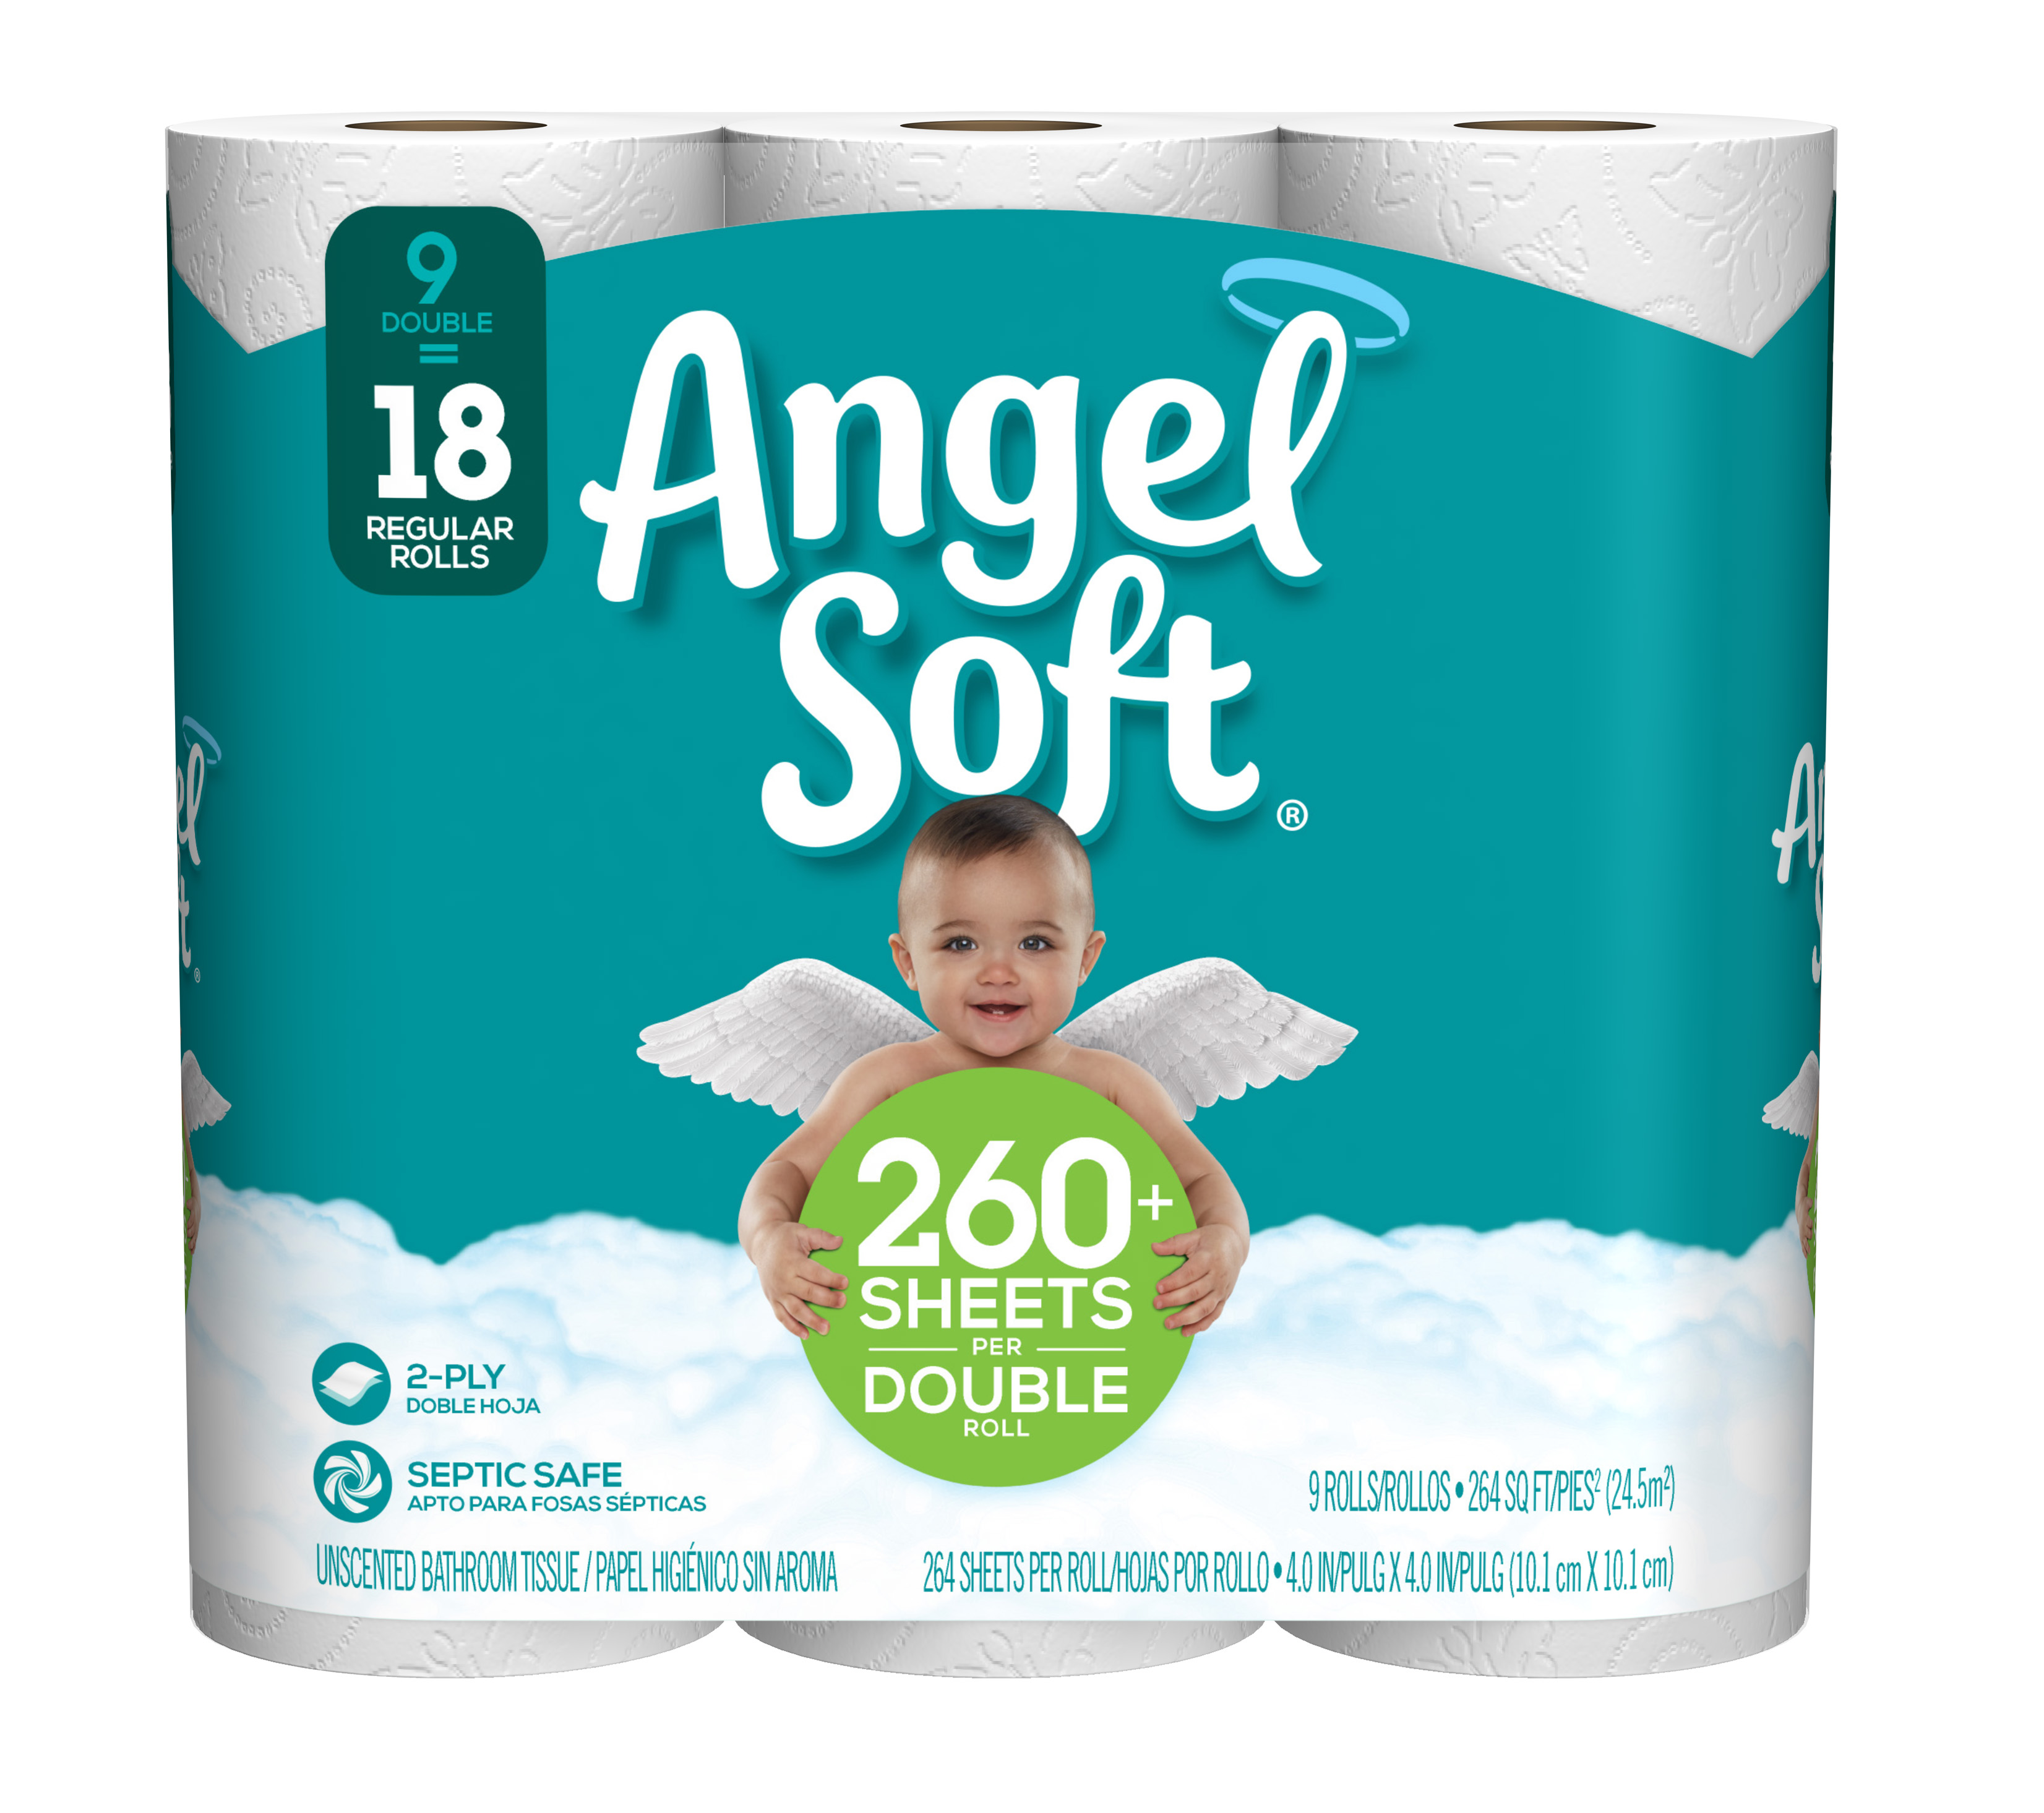 Angel Soft Toilet Paper, 9 Double Rolls - image 1 of 12